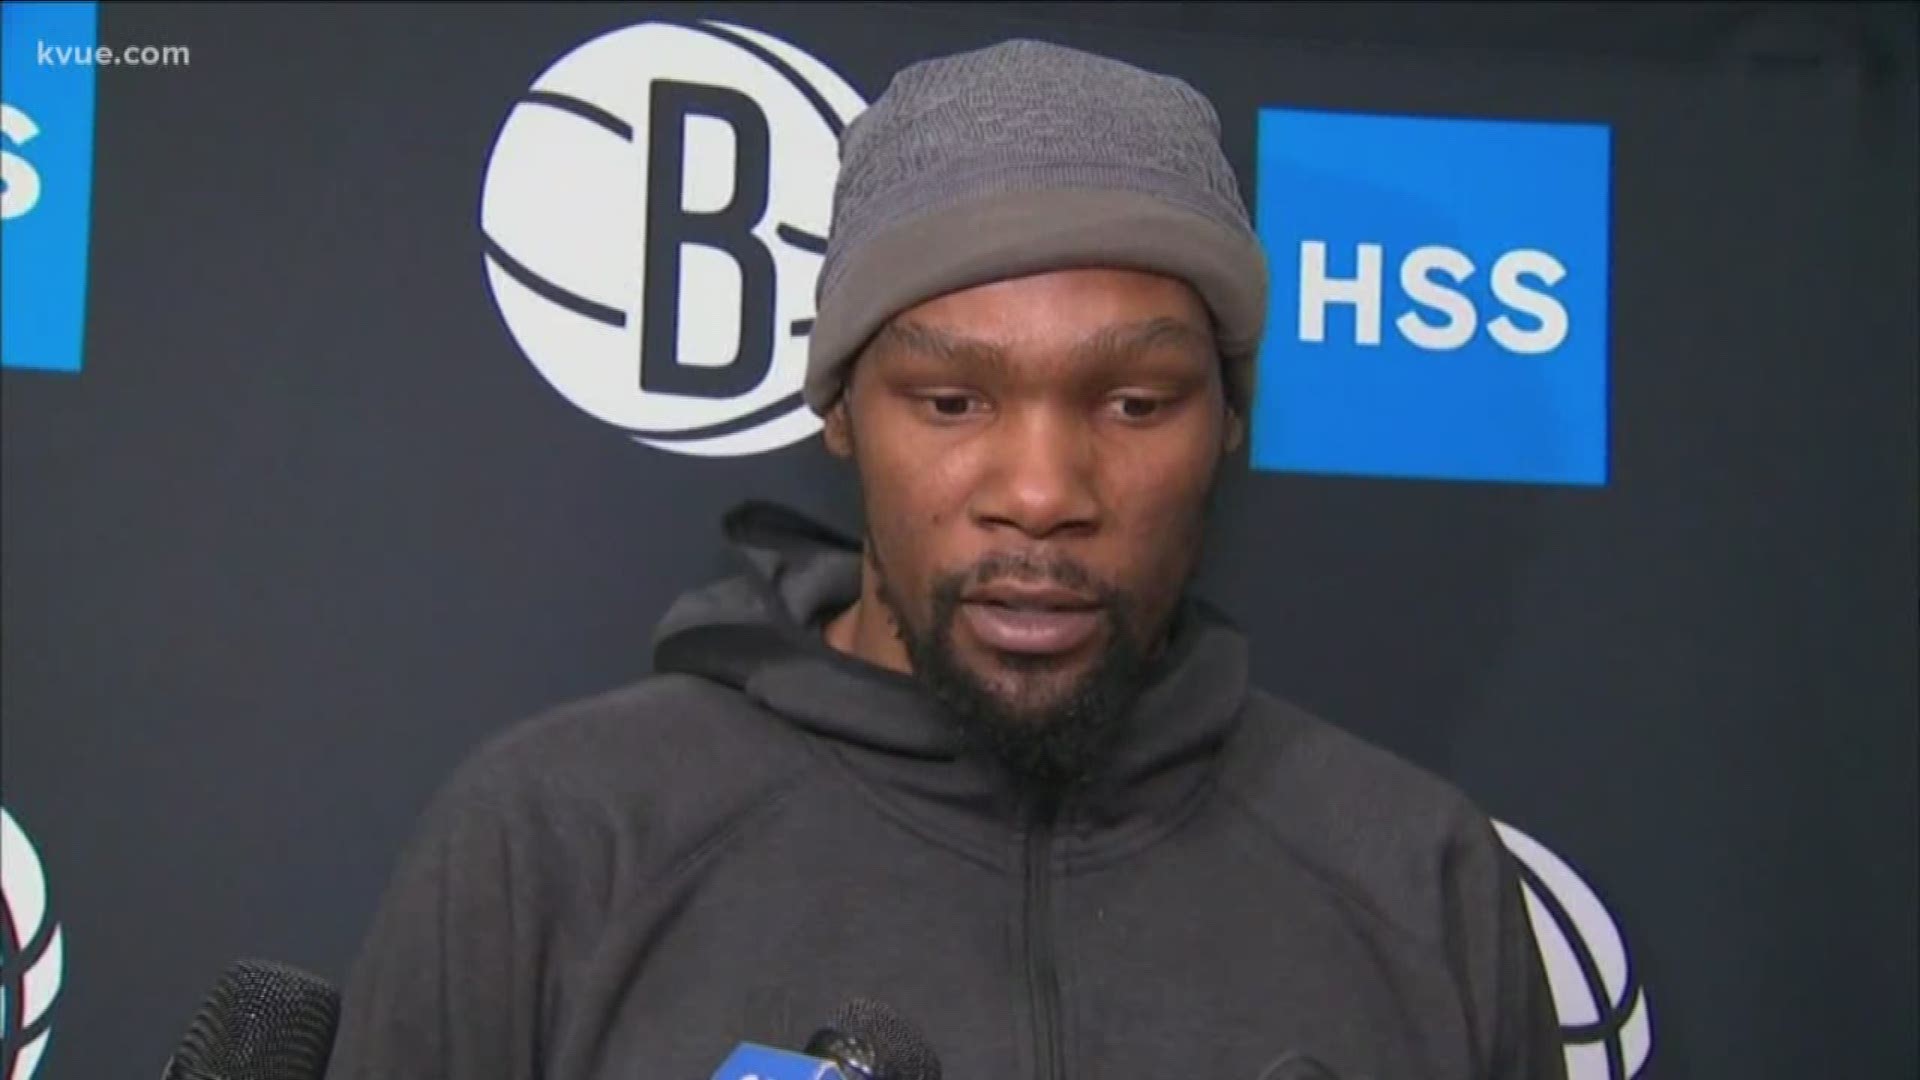 Former Texas Longhorn Kevin Durant spoke to the media about the passing of Kobe Bryant.